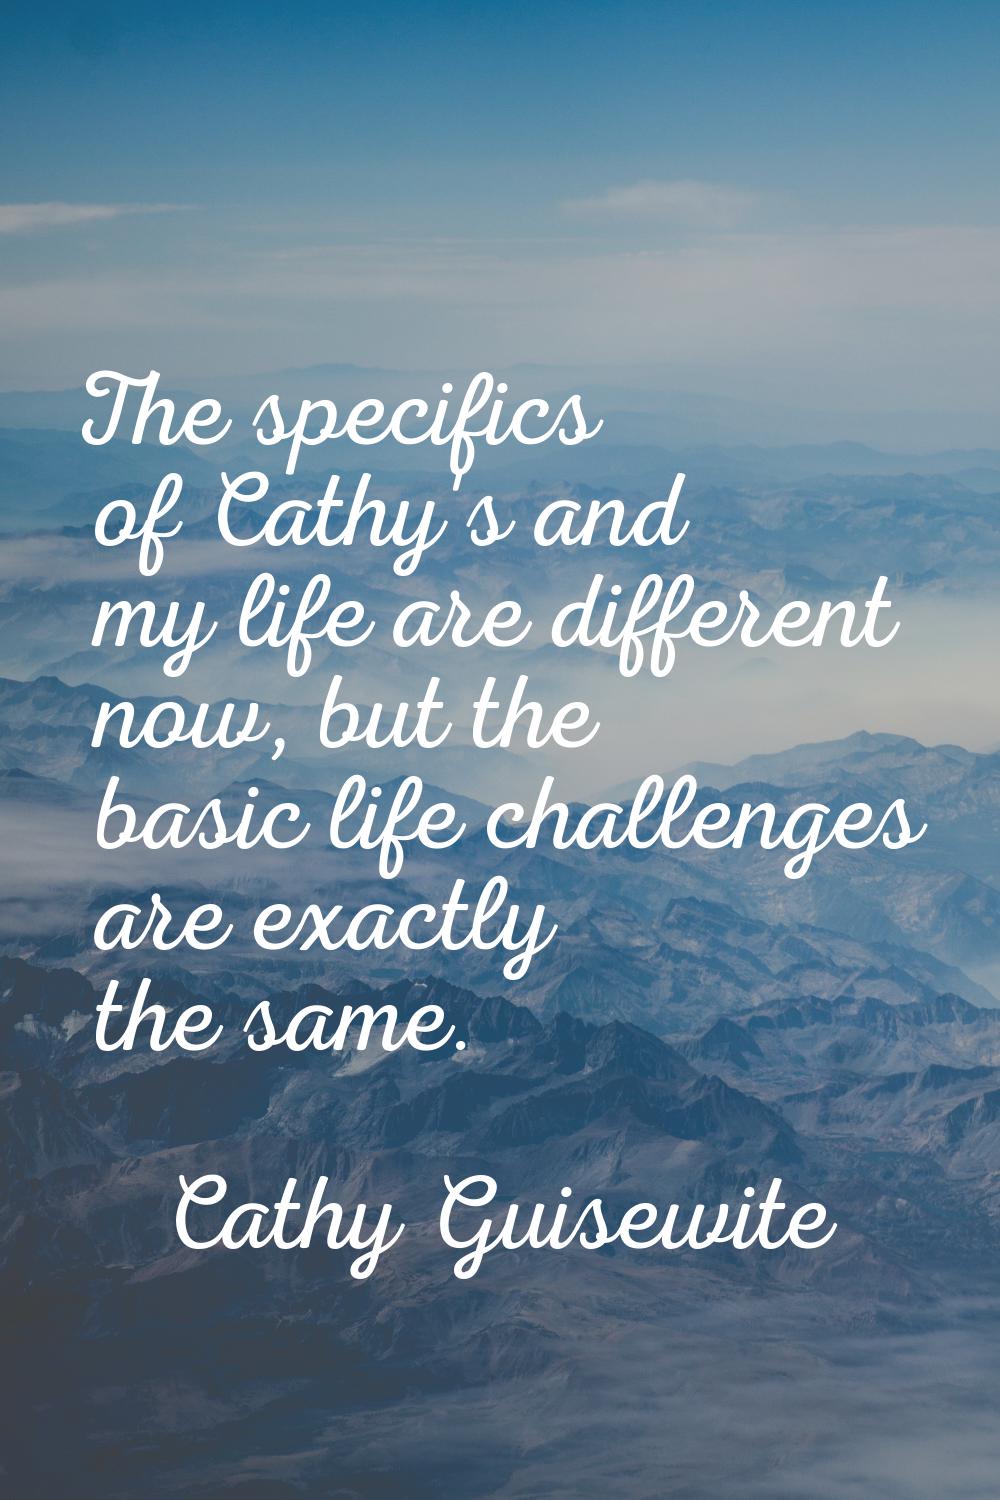 The specifics of Cathy's and my life are different now, but the basic life challenges are exactly t